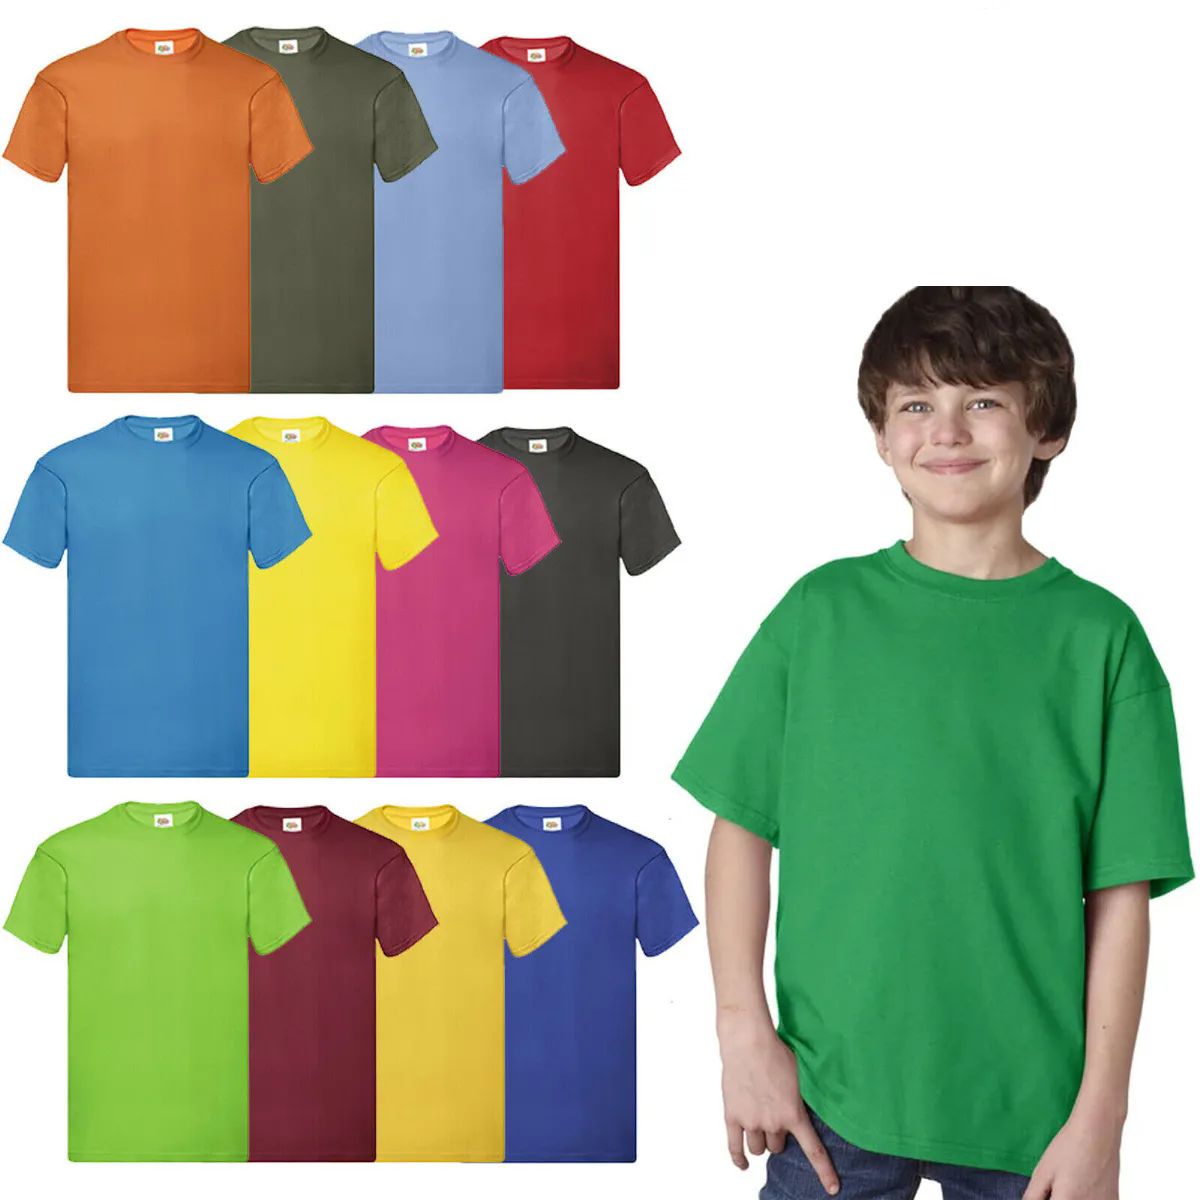 288 Pieces of Billion Hats Kids Youth Cotton Assorted Colors T Shirts Size S